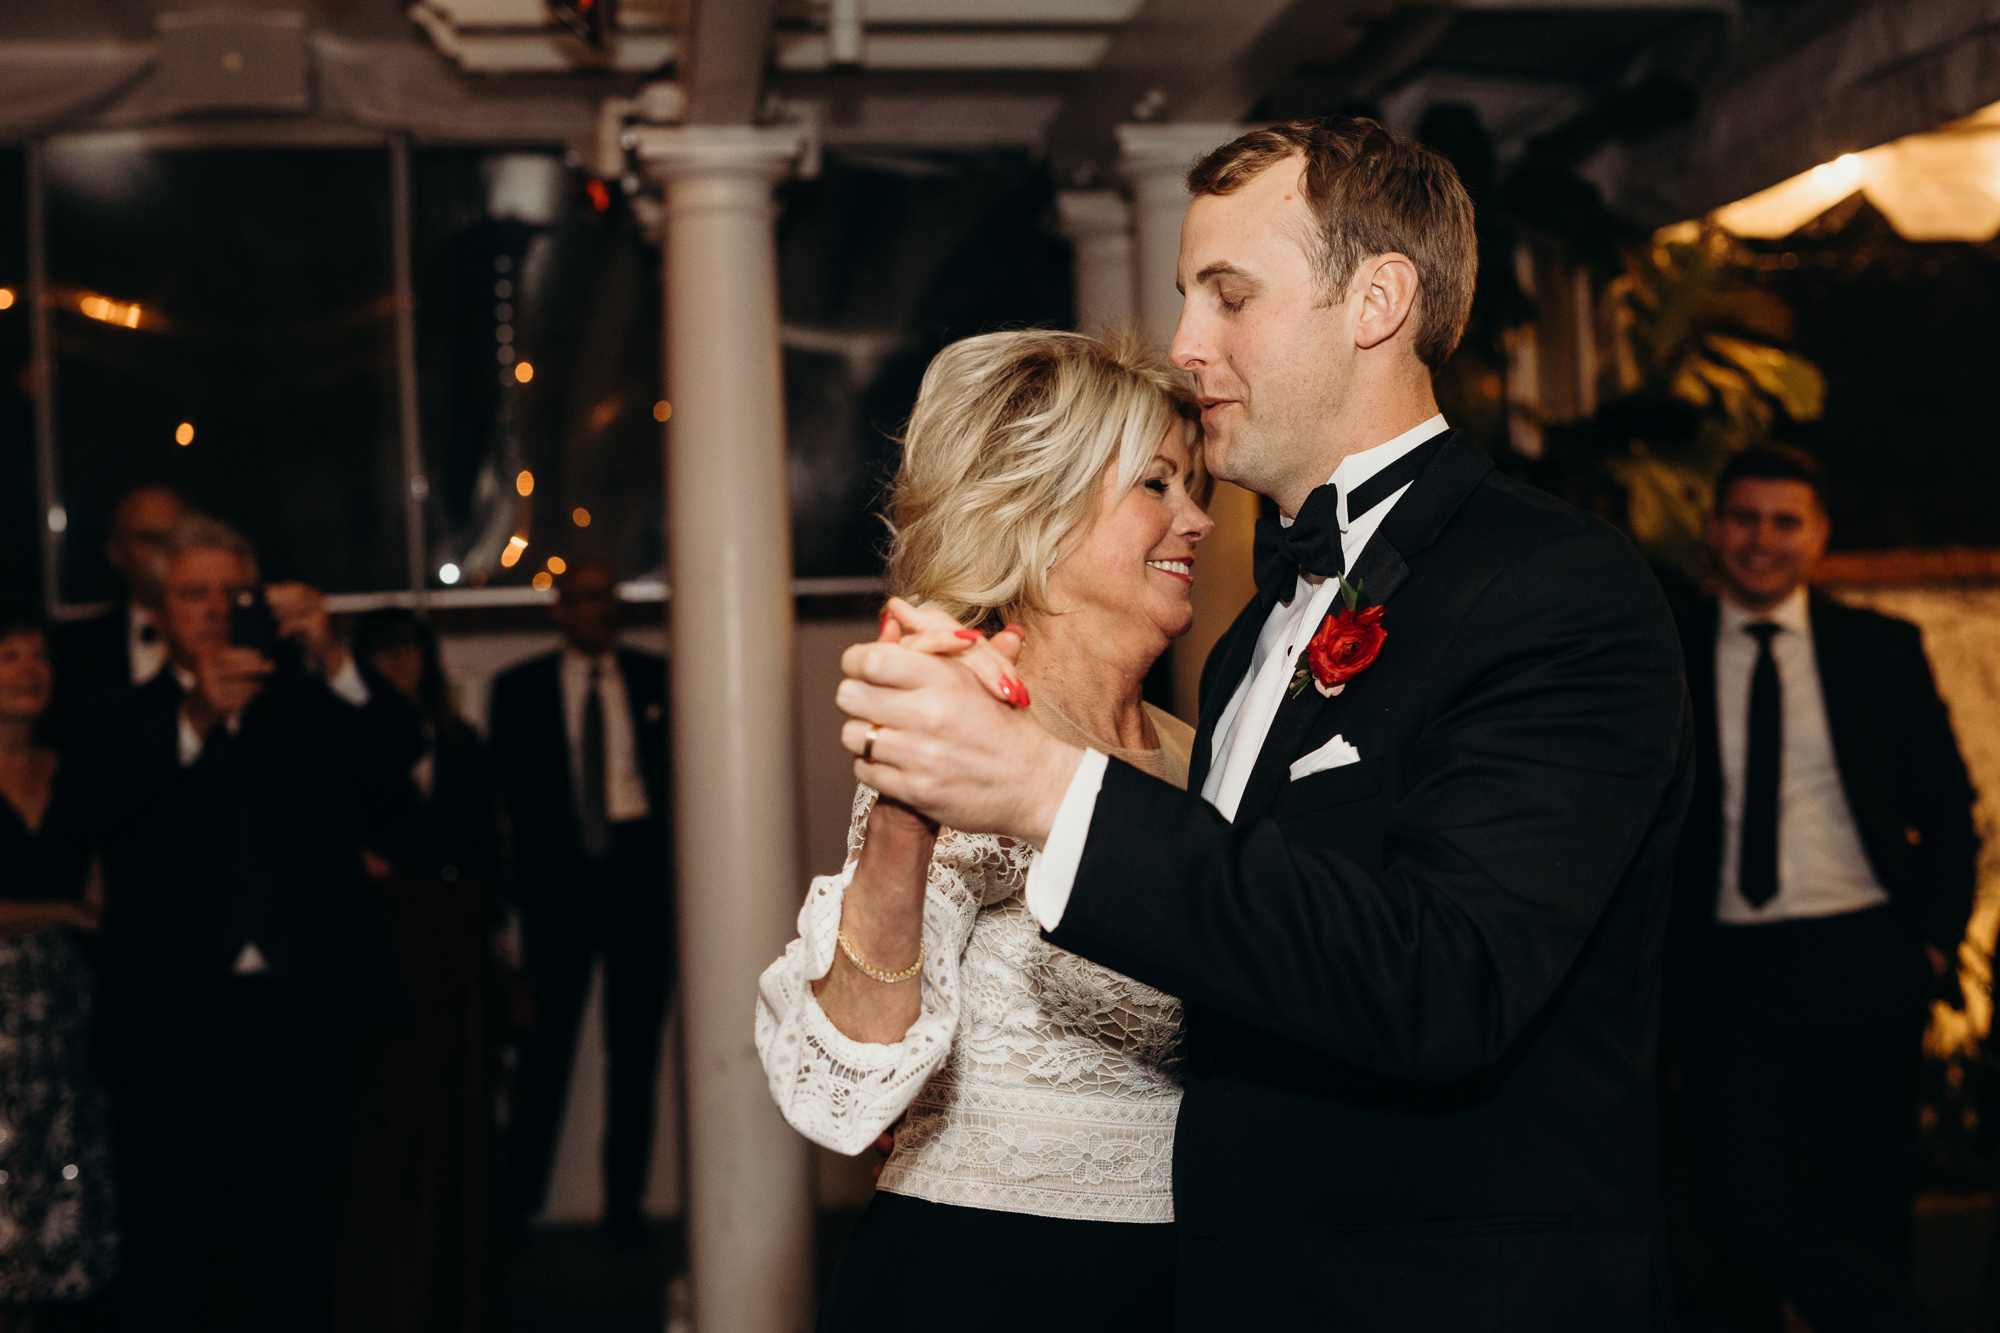 groom dances with mother at wedding reception at five crowns in newport beach, CA